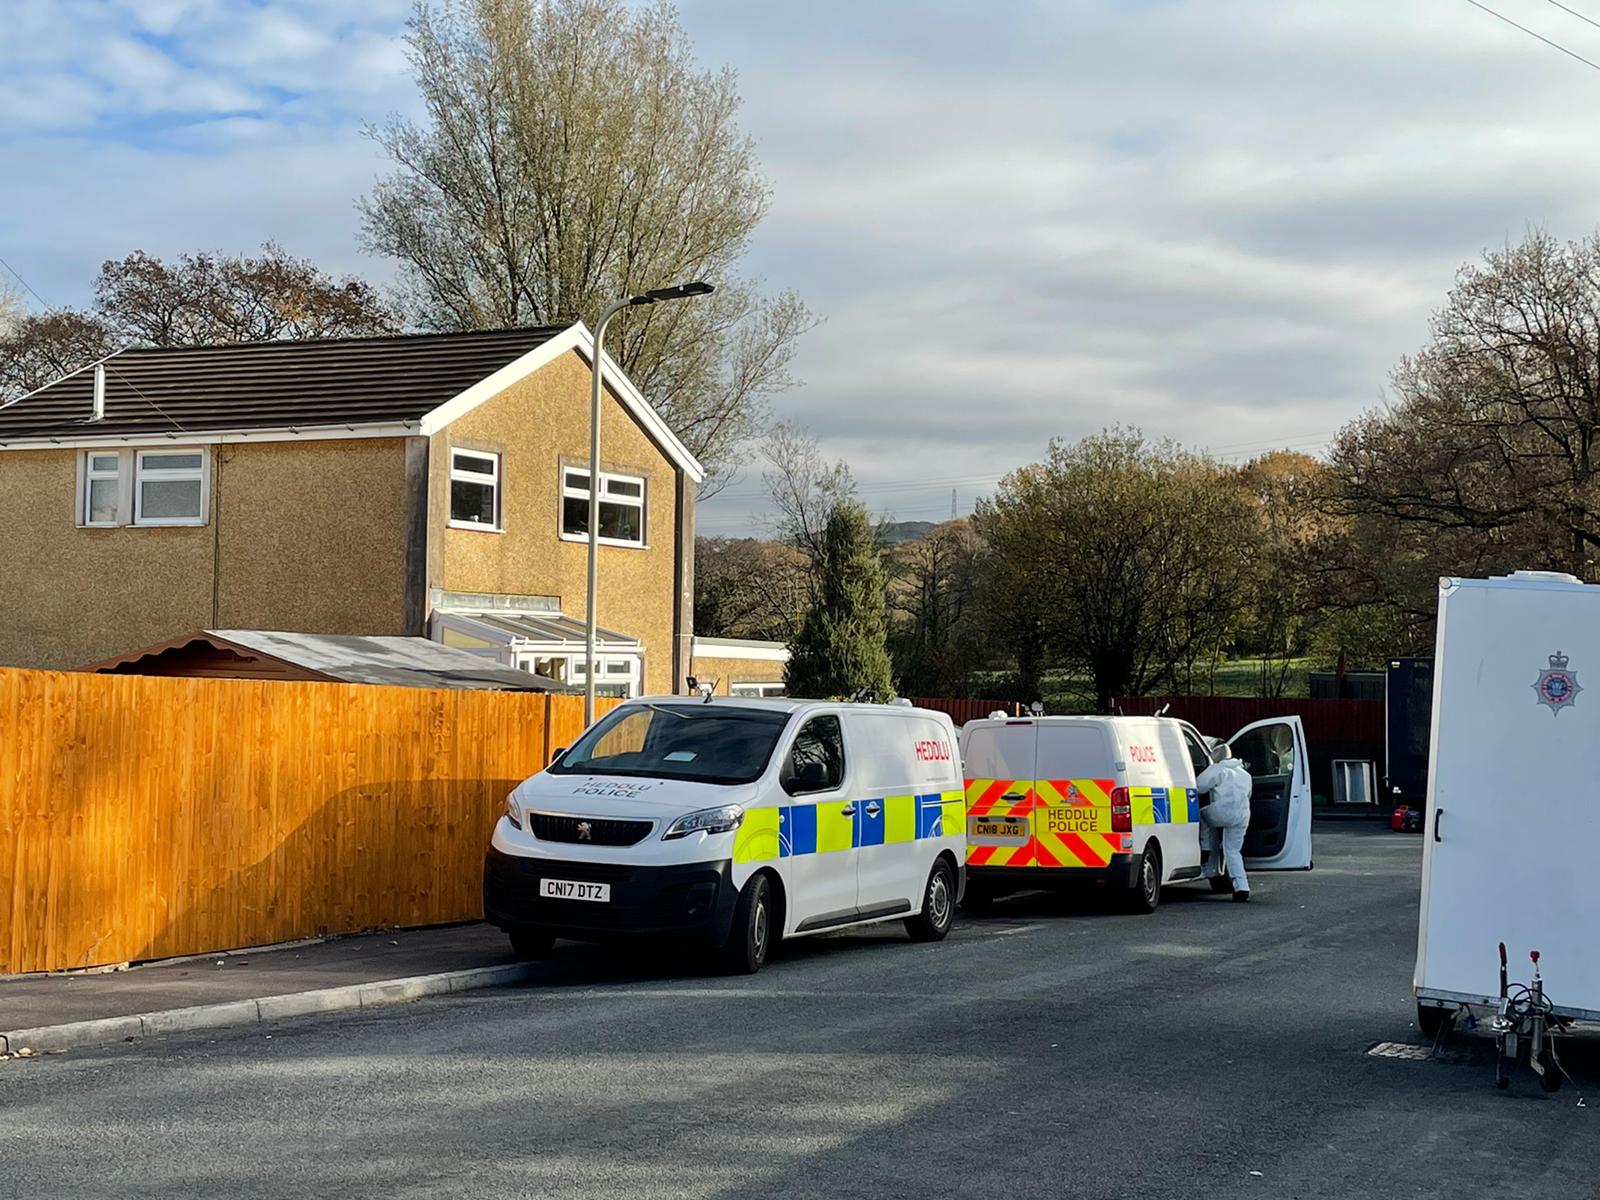 Forensic officers remain at the scene of suspected murder in Llantwit Fardre, Pontypridd. (Bronwen Weatherby/PA)